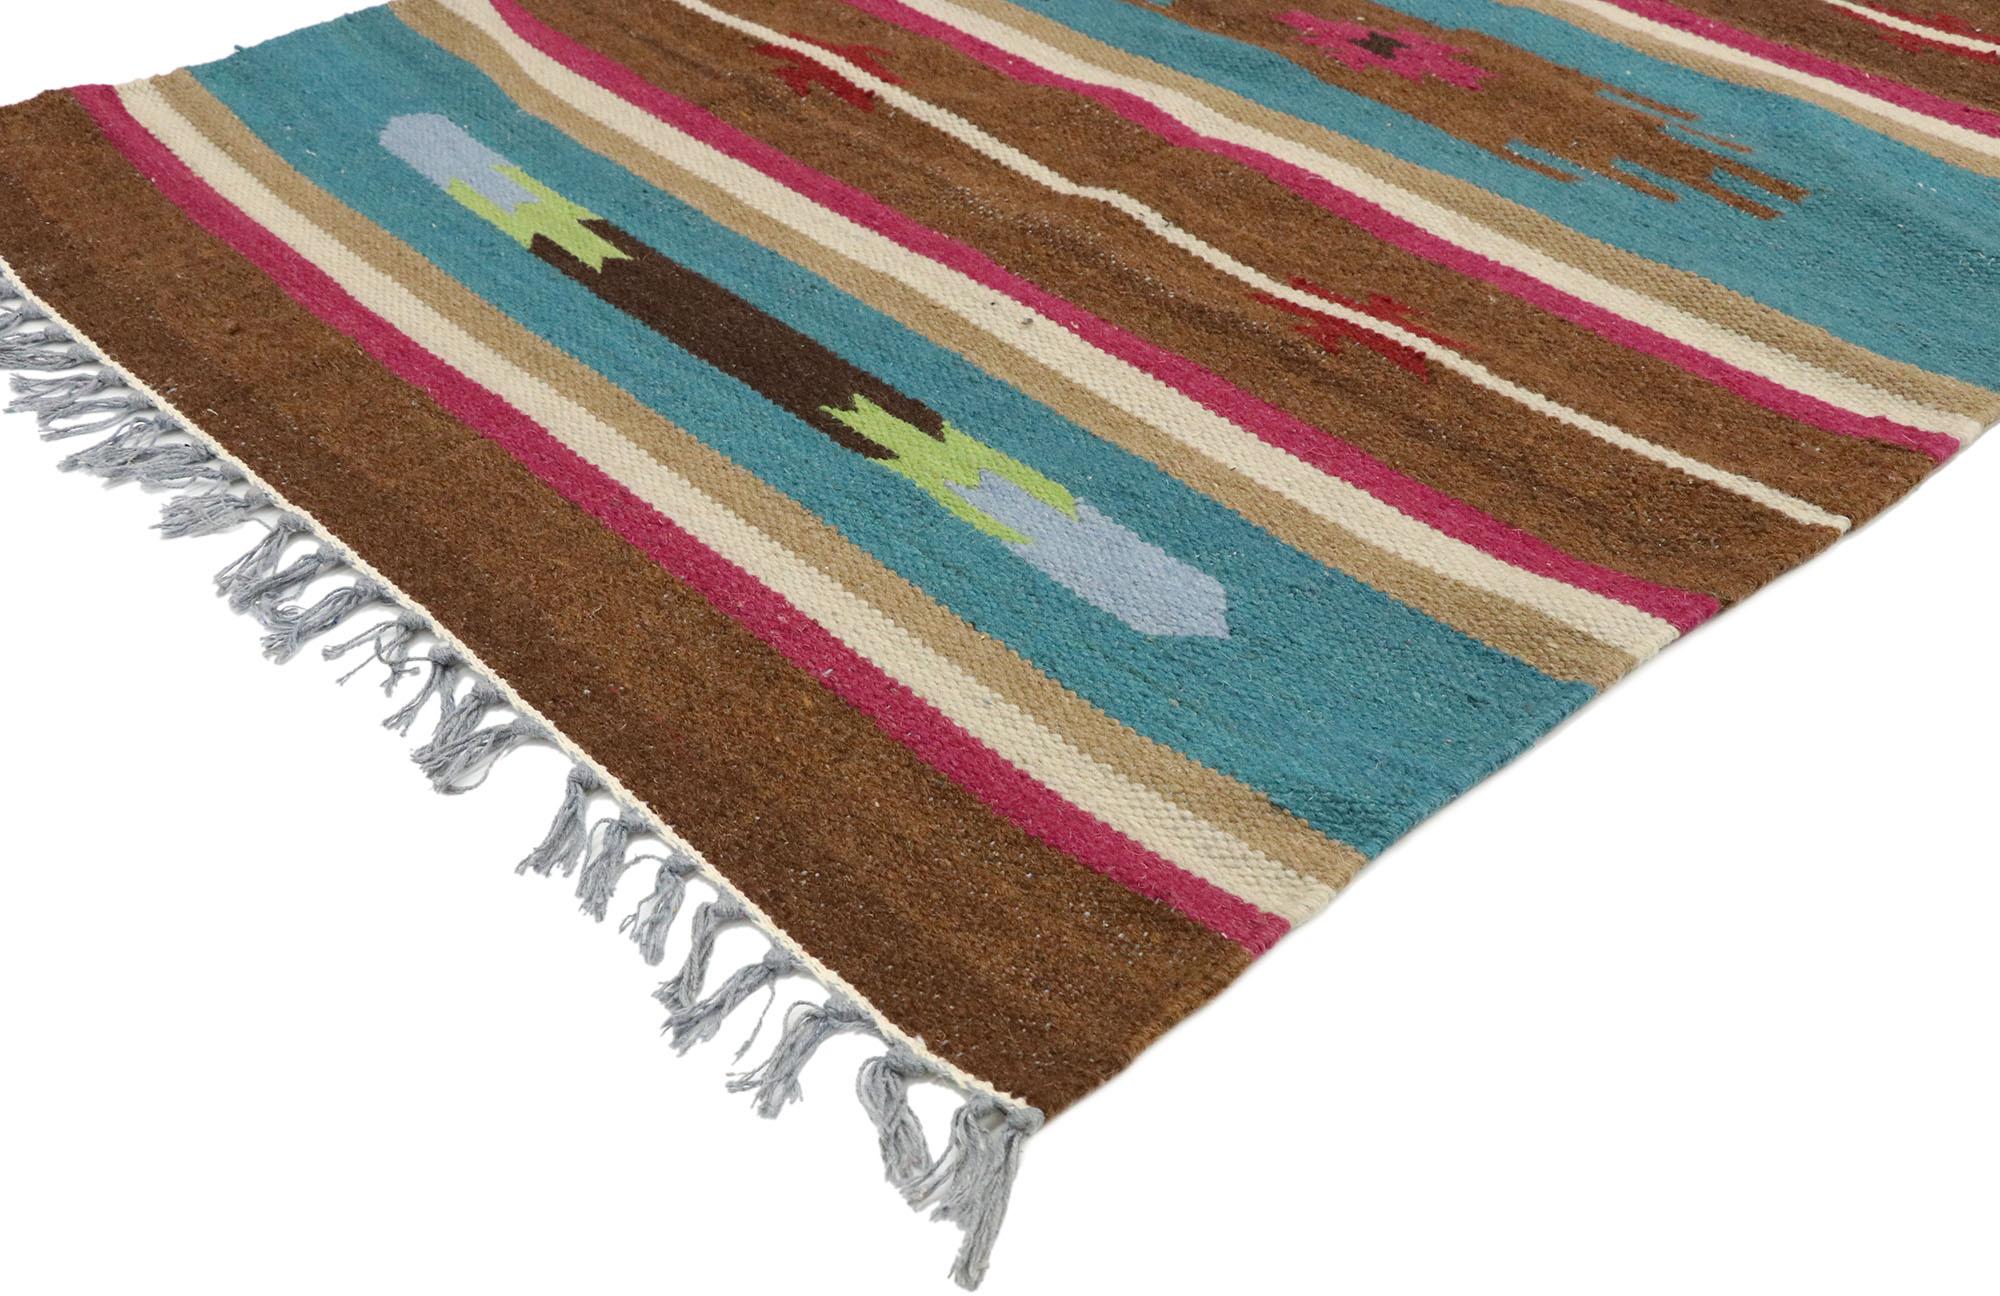 77485, vintage American Kilim rug with Modern Mexican style. With its bold expressive design, incredible detail and texture, this handwoven wool vintage American Kilim rug is a captivating vision of woven beauty highlighting exuberant colors